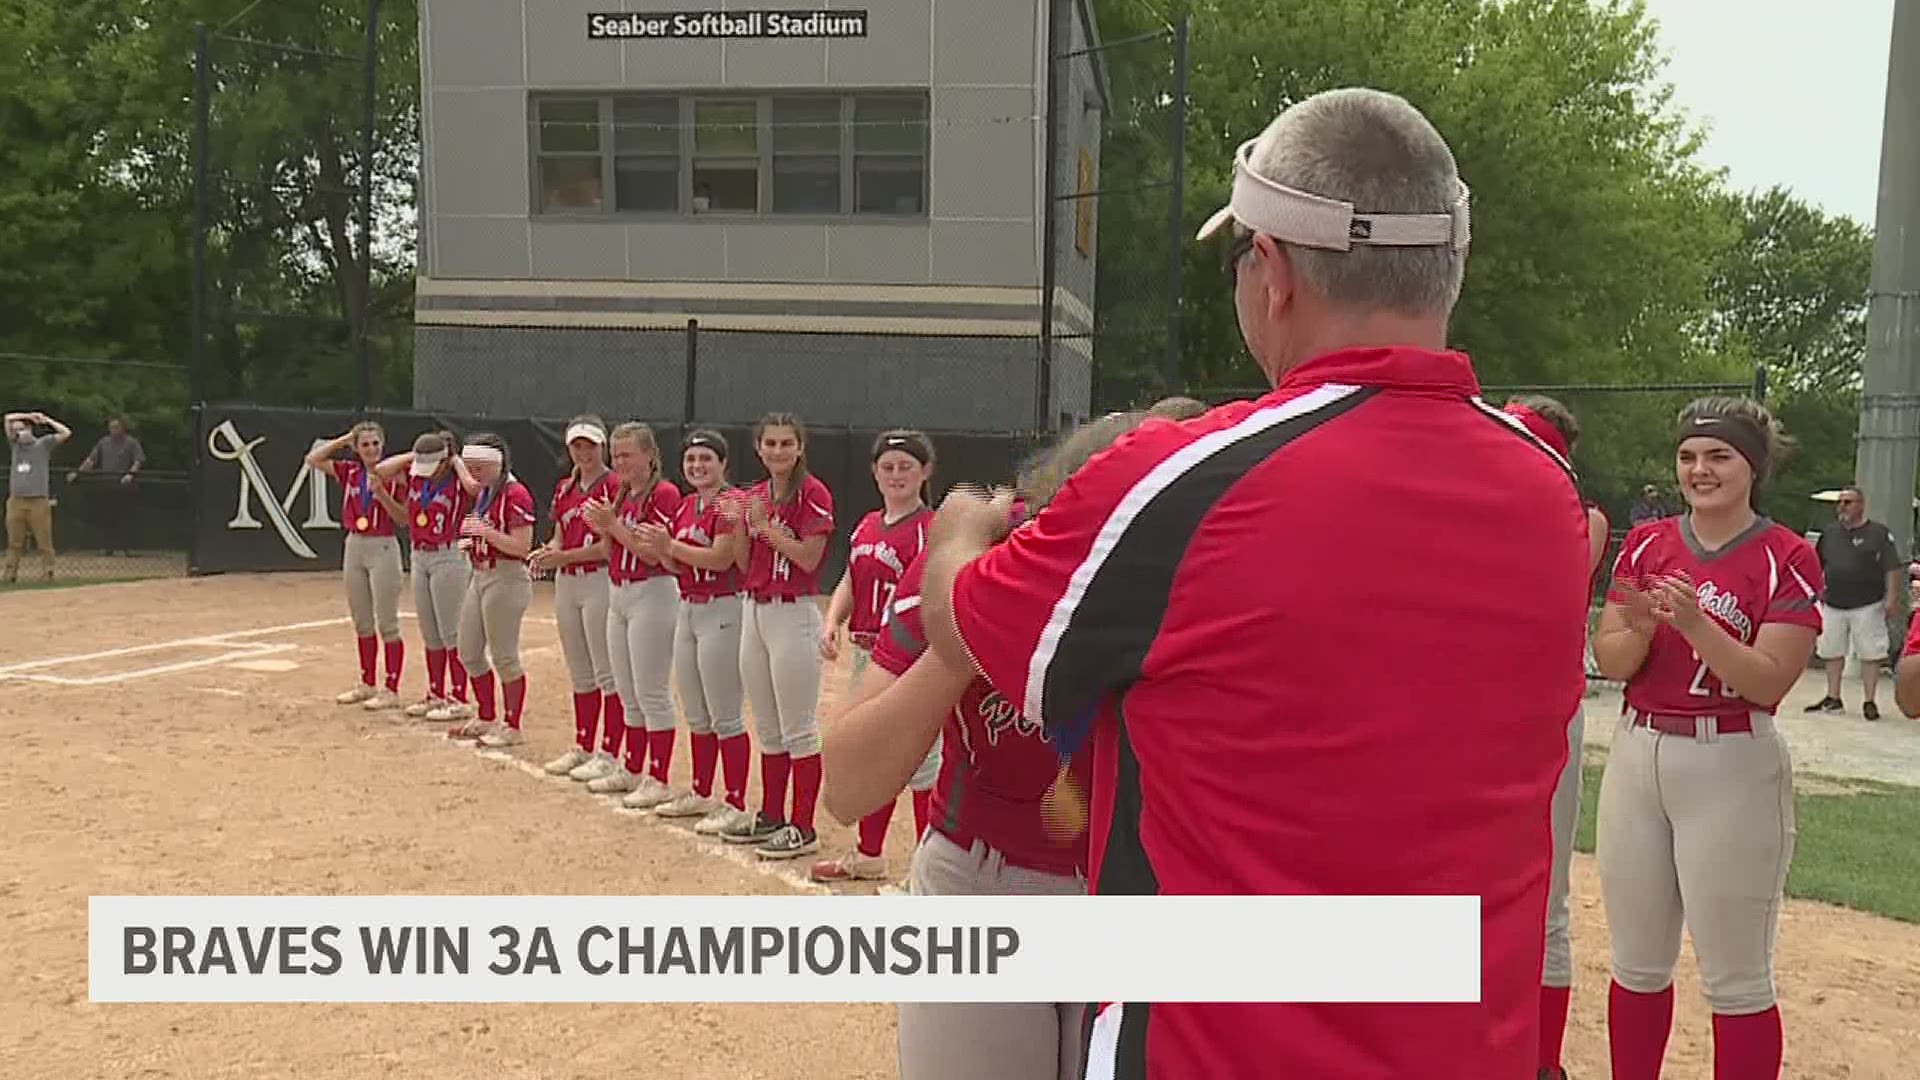 Warwick and Pequea Valley earn softball titles before the skies open up